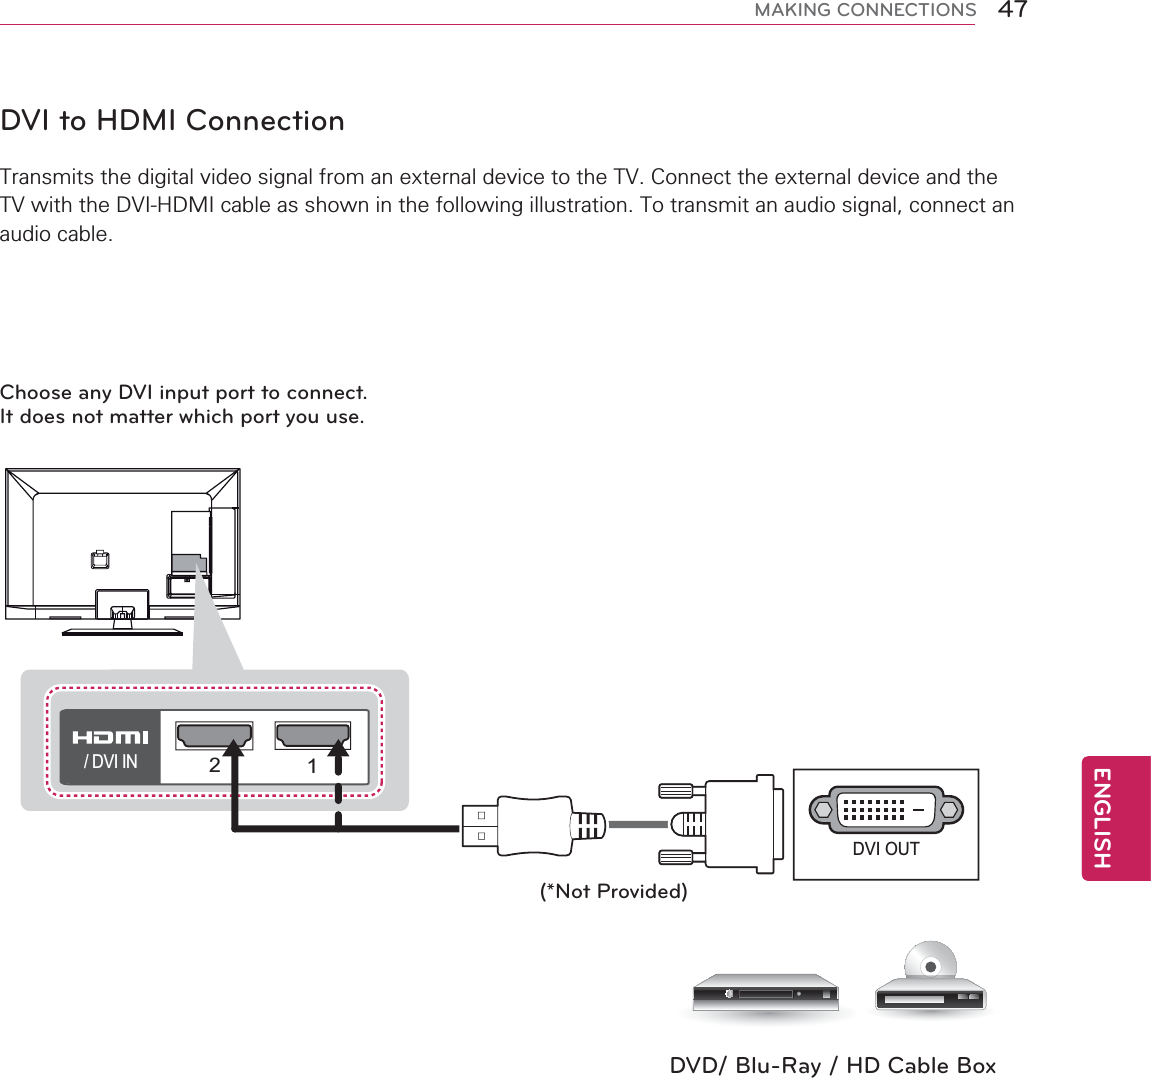 47ENGENGLISHMAKING CONNECTIONSDVI to HDMI Connection21DVI OUT/ DVI IN(*Not Provided)DVD/ Blu-Ray / HD Cable BoxChoose any DVI input port to connect. It does not matter which port you use.